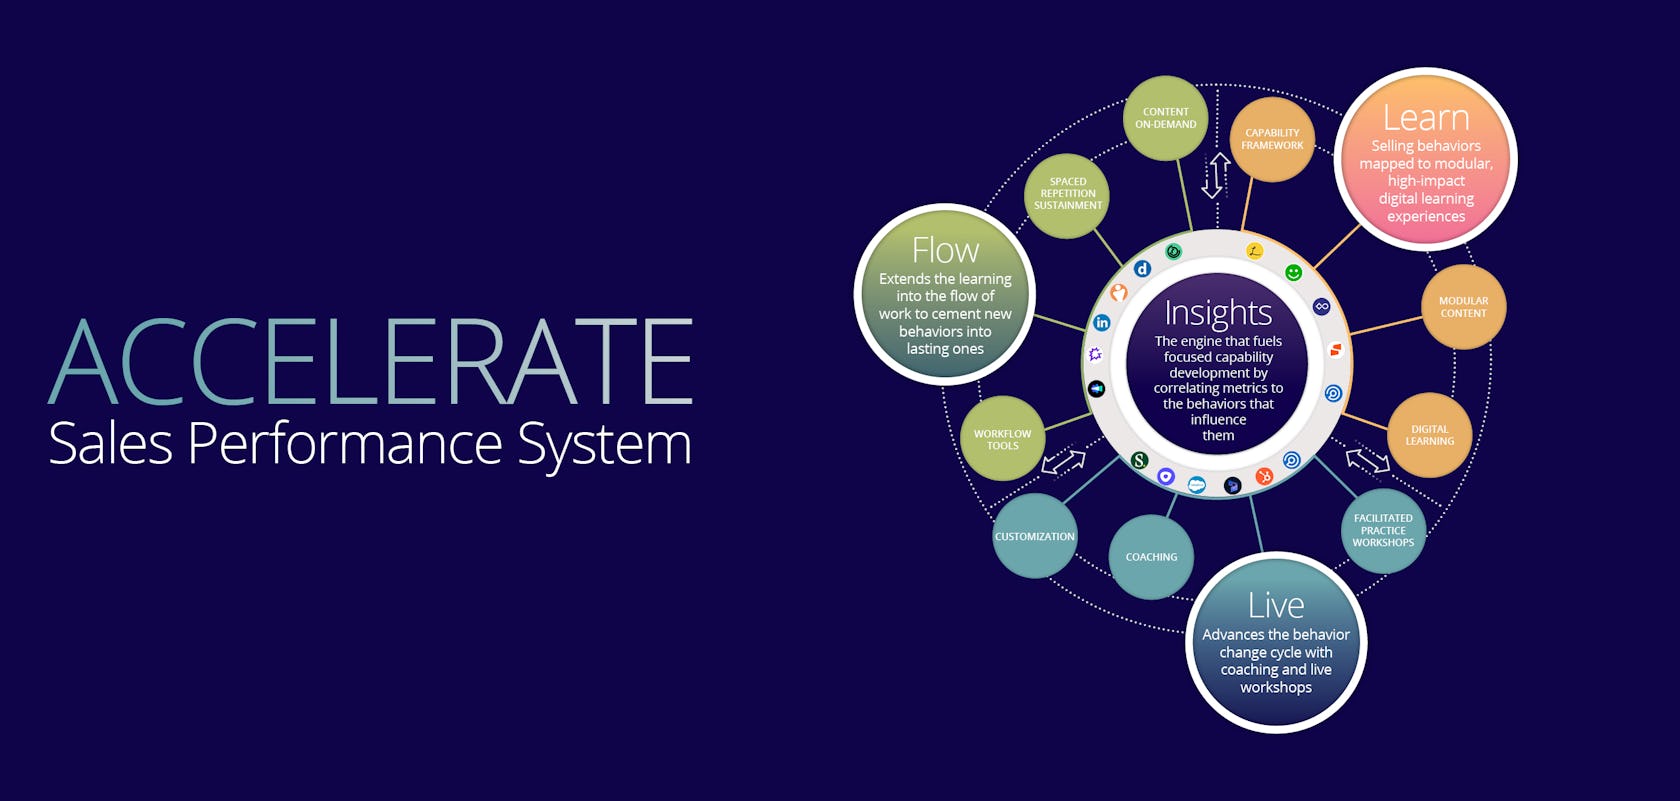 accelerate sales performance system overview banner that highlights all of of the components - insights, learn, live, and flow